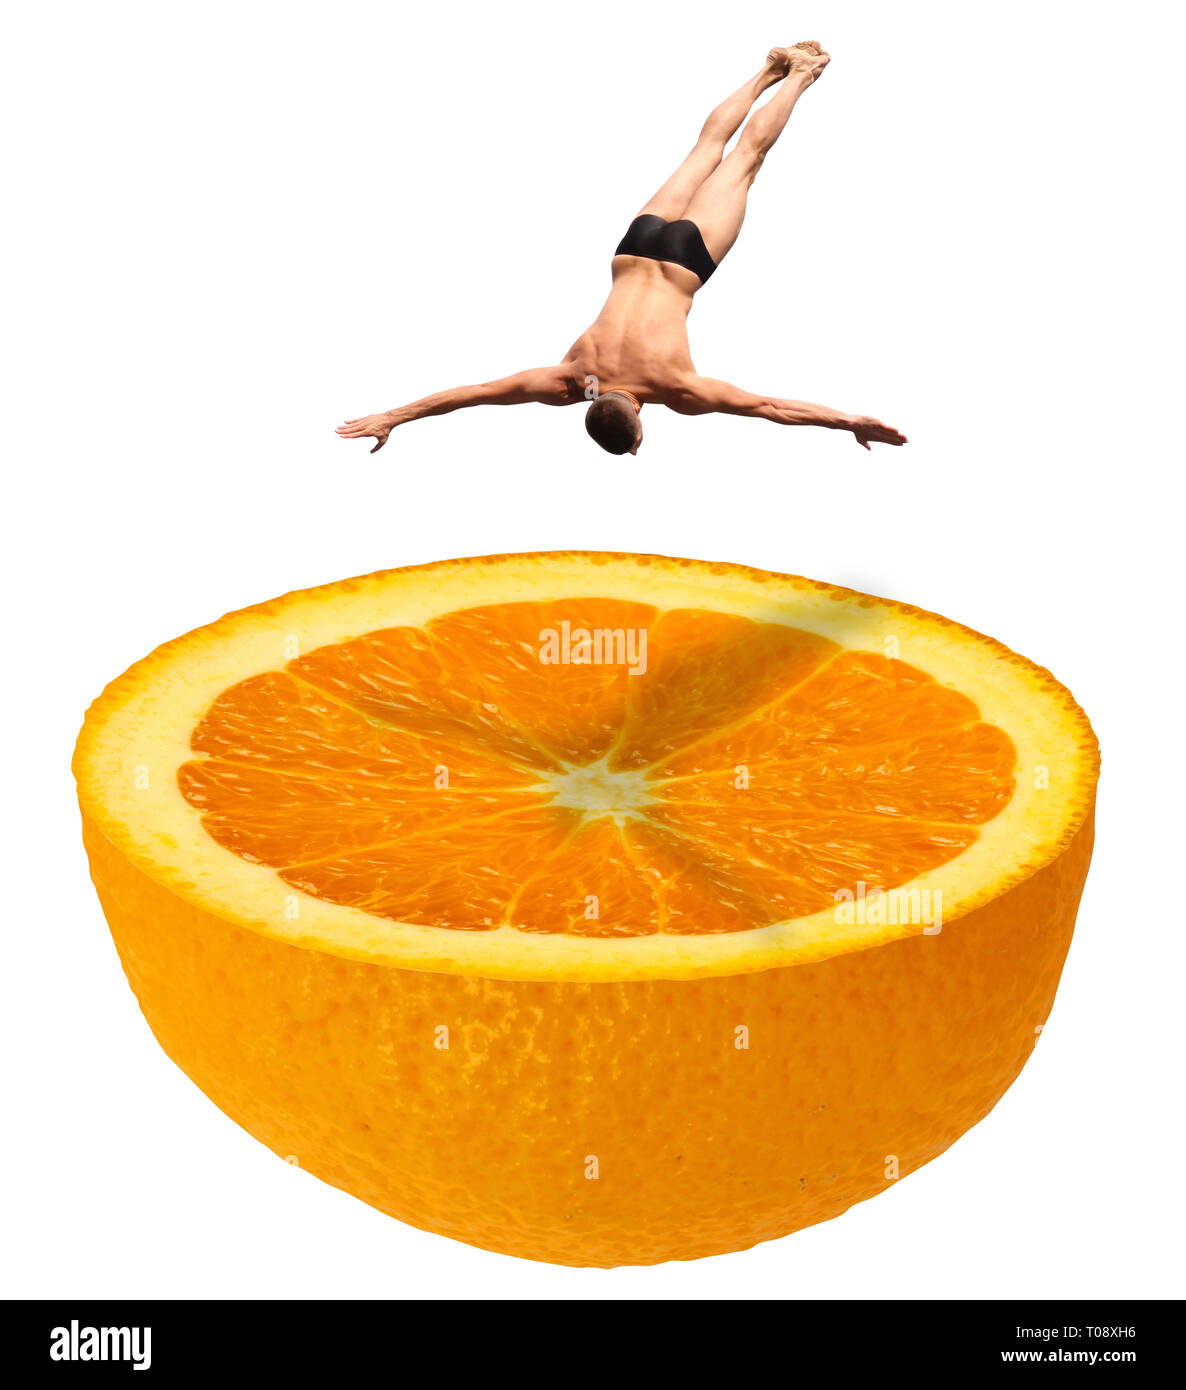 High diving swimmer in swim suit briefs jumping down in a half fresh juicy orange fruit like a swimming pool - manipulated photo concept image - isola Stock Photo